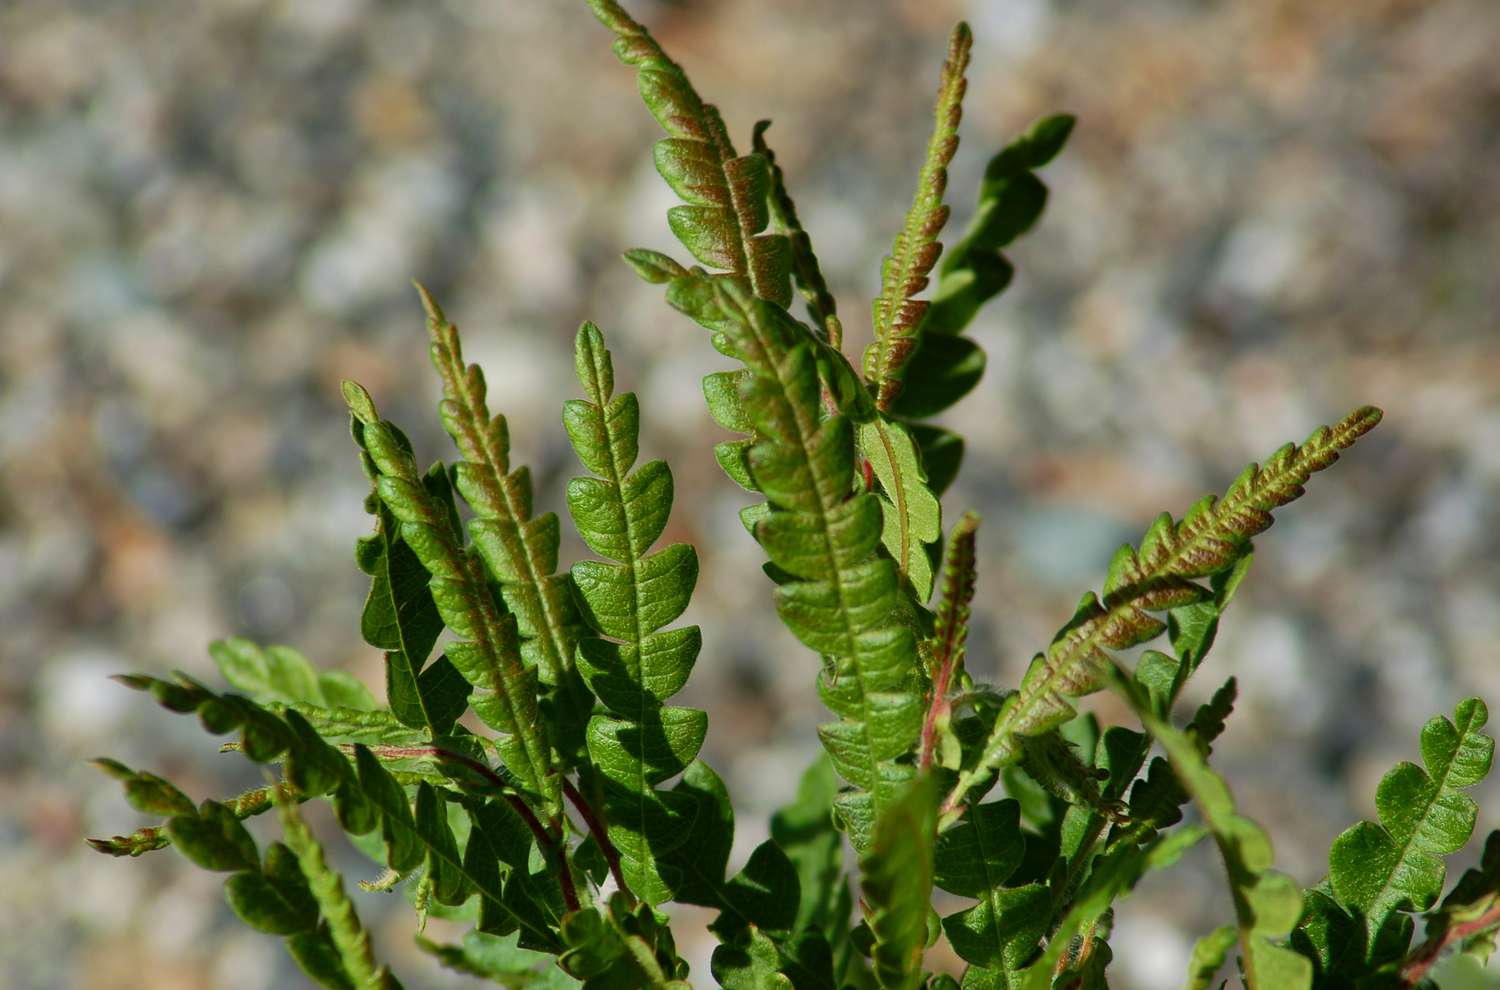 sweetfern closeup picture